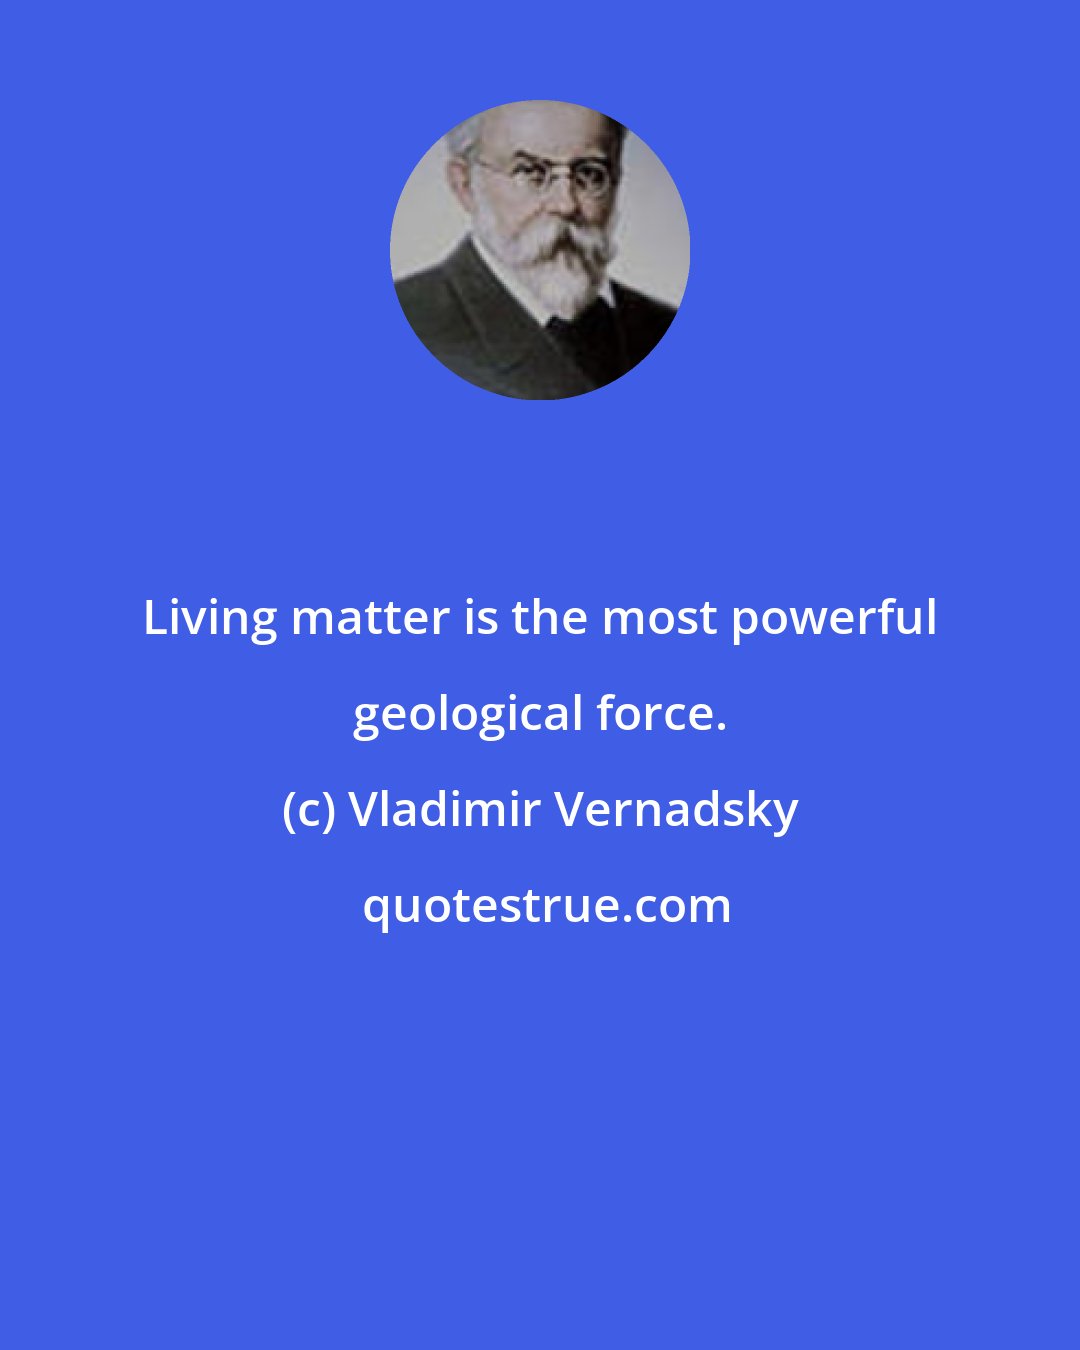 Vladimir Vernadsky: Living matter is the most powerful geological force.